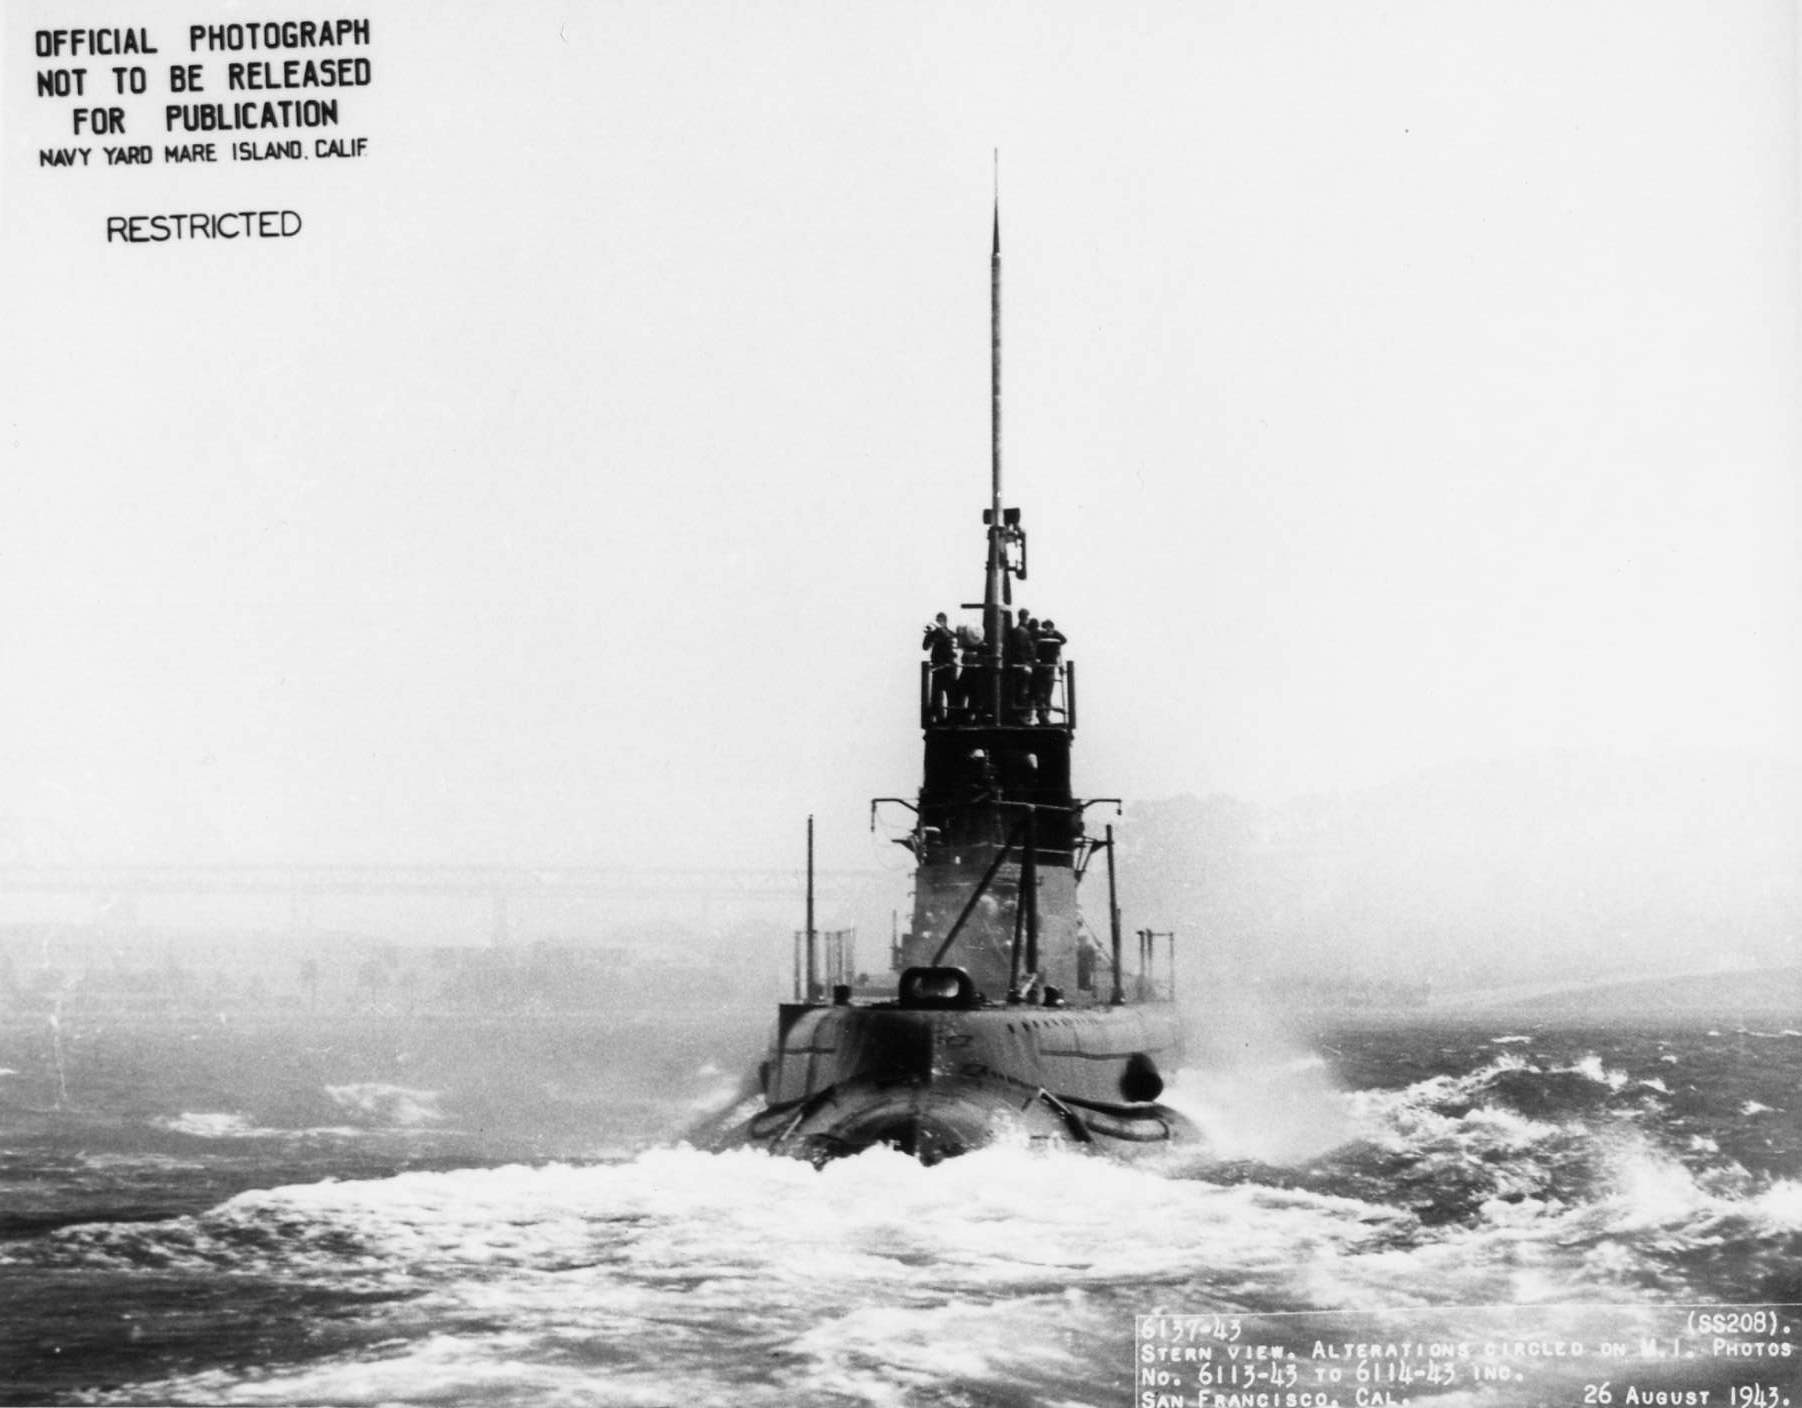 Stern view of USS Grayback off Hunter's Point, San Francisco, California, United States, 26 Aug 1943